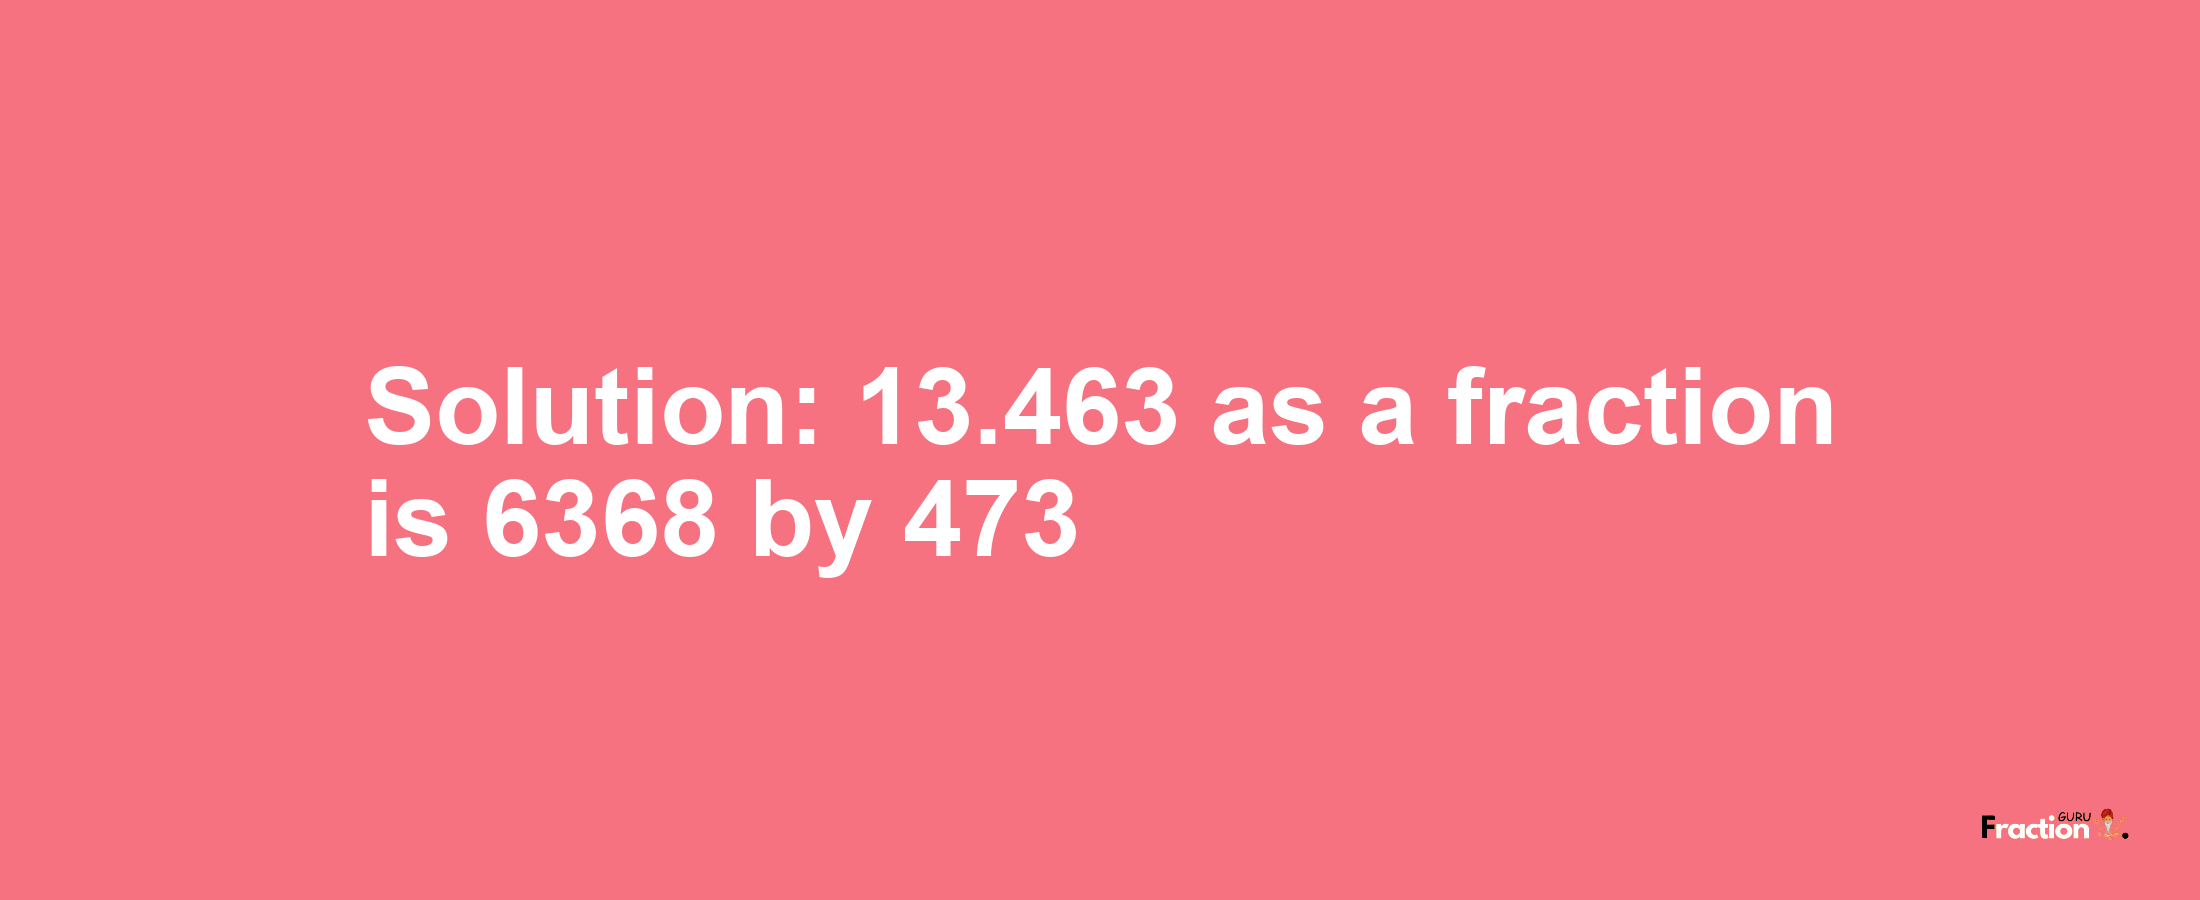 Solution:13.463 as a fraction is 6368/473